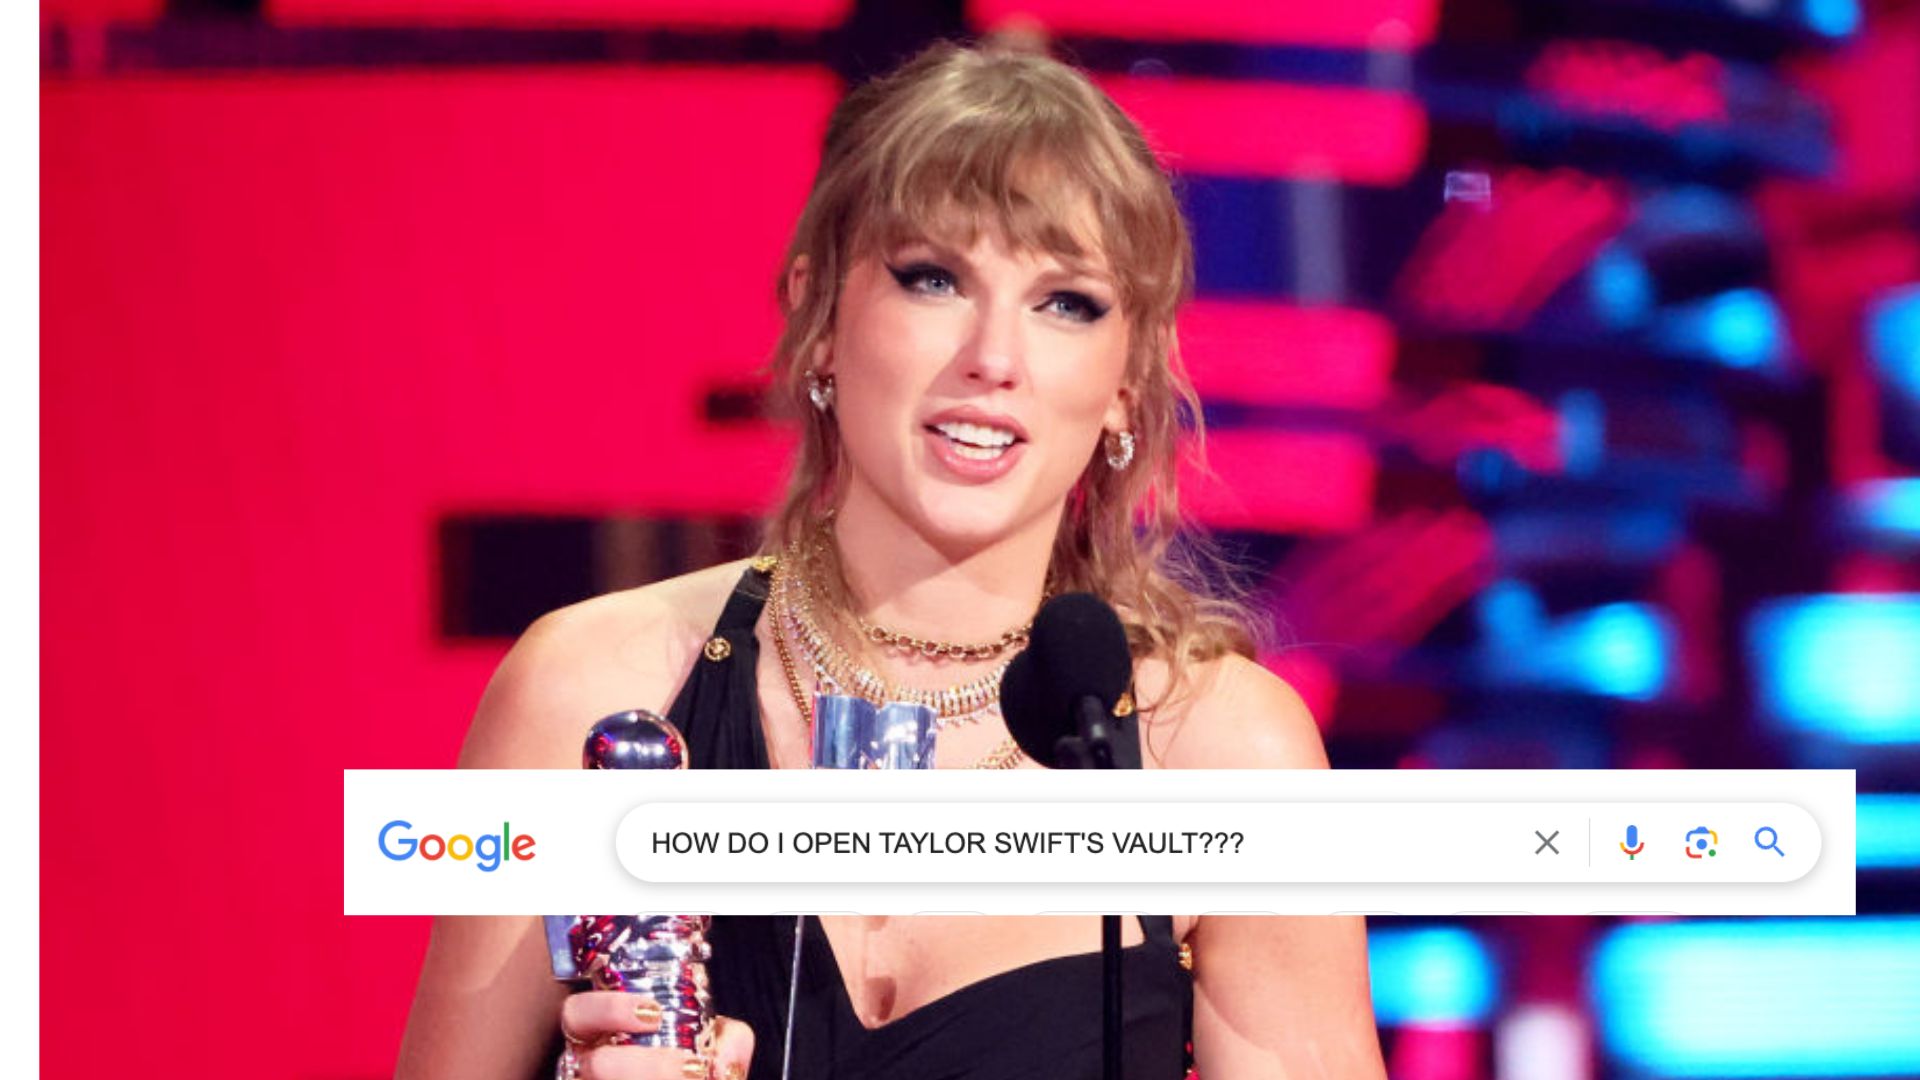 How Do I Open Taylor Swift's Vault Puzzle? Help Me